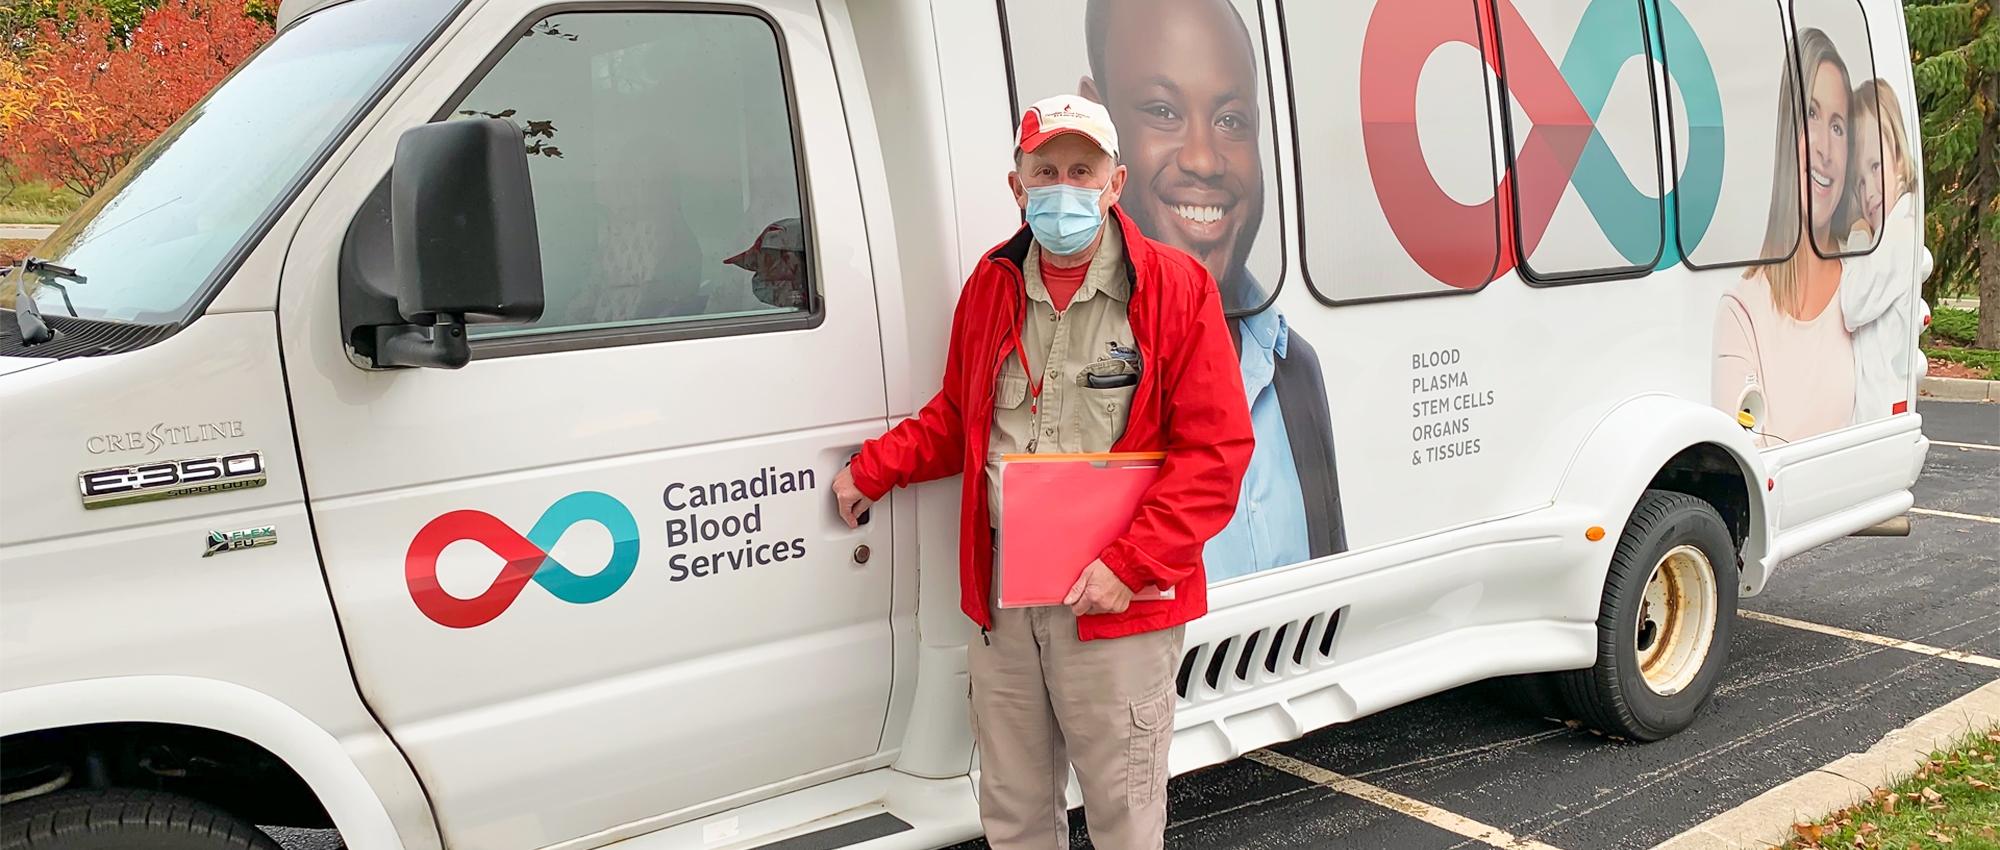 Image of Volunteer bus driver David Neu wearing a mask and holding a clipboard stands at the driver-side door of a short white bus with the Canadian Blood Services logo.